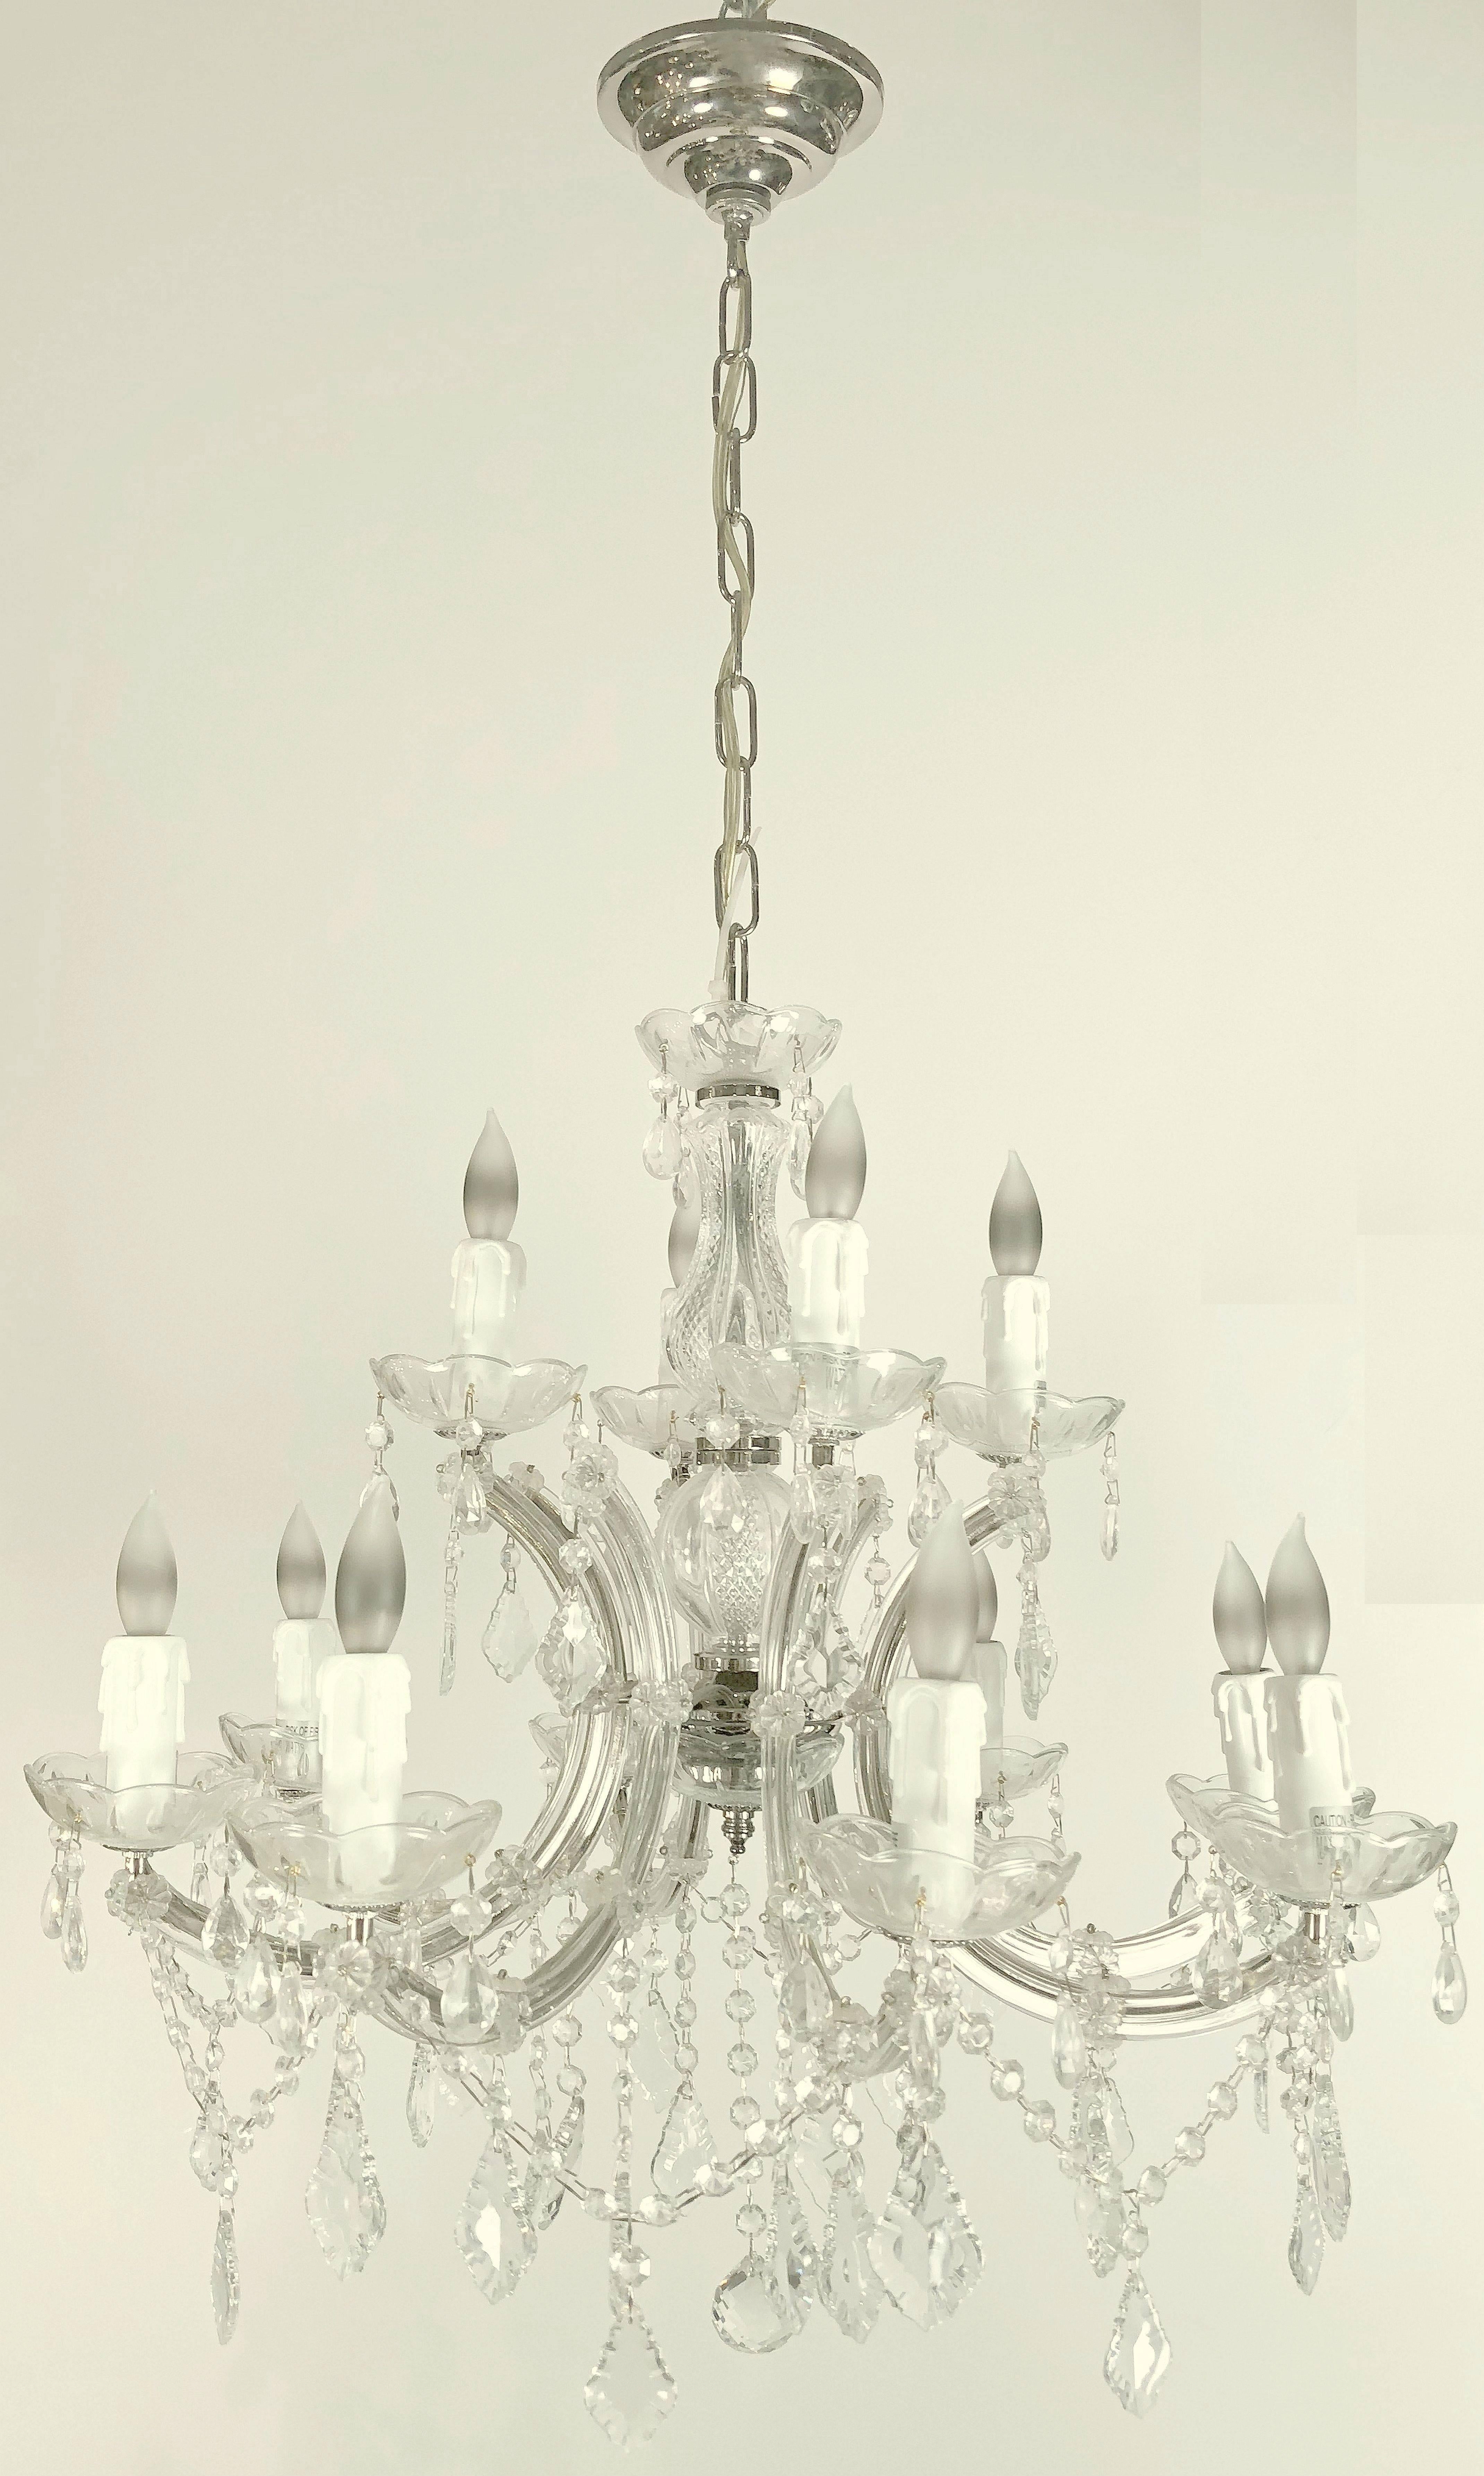 A lovely large Maria Theresa twelve-light chandelier (or hanging fixture) of crystal, glass and chromed metal featuring serpentine arms, each candle light with dangling pendants and decorative bobeche.

Measures: 24 inches diameter.

U.S.-wired